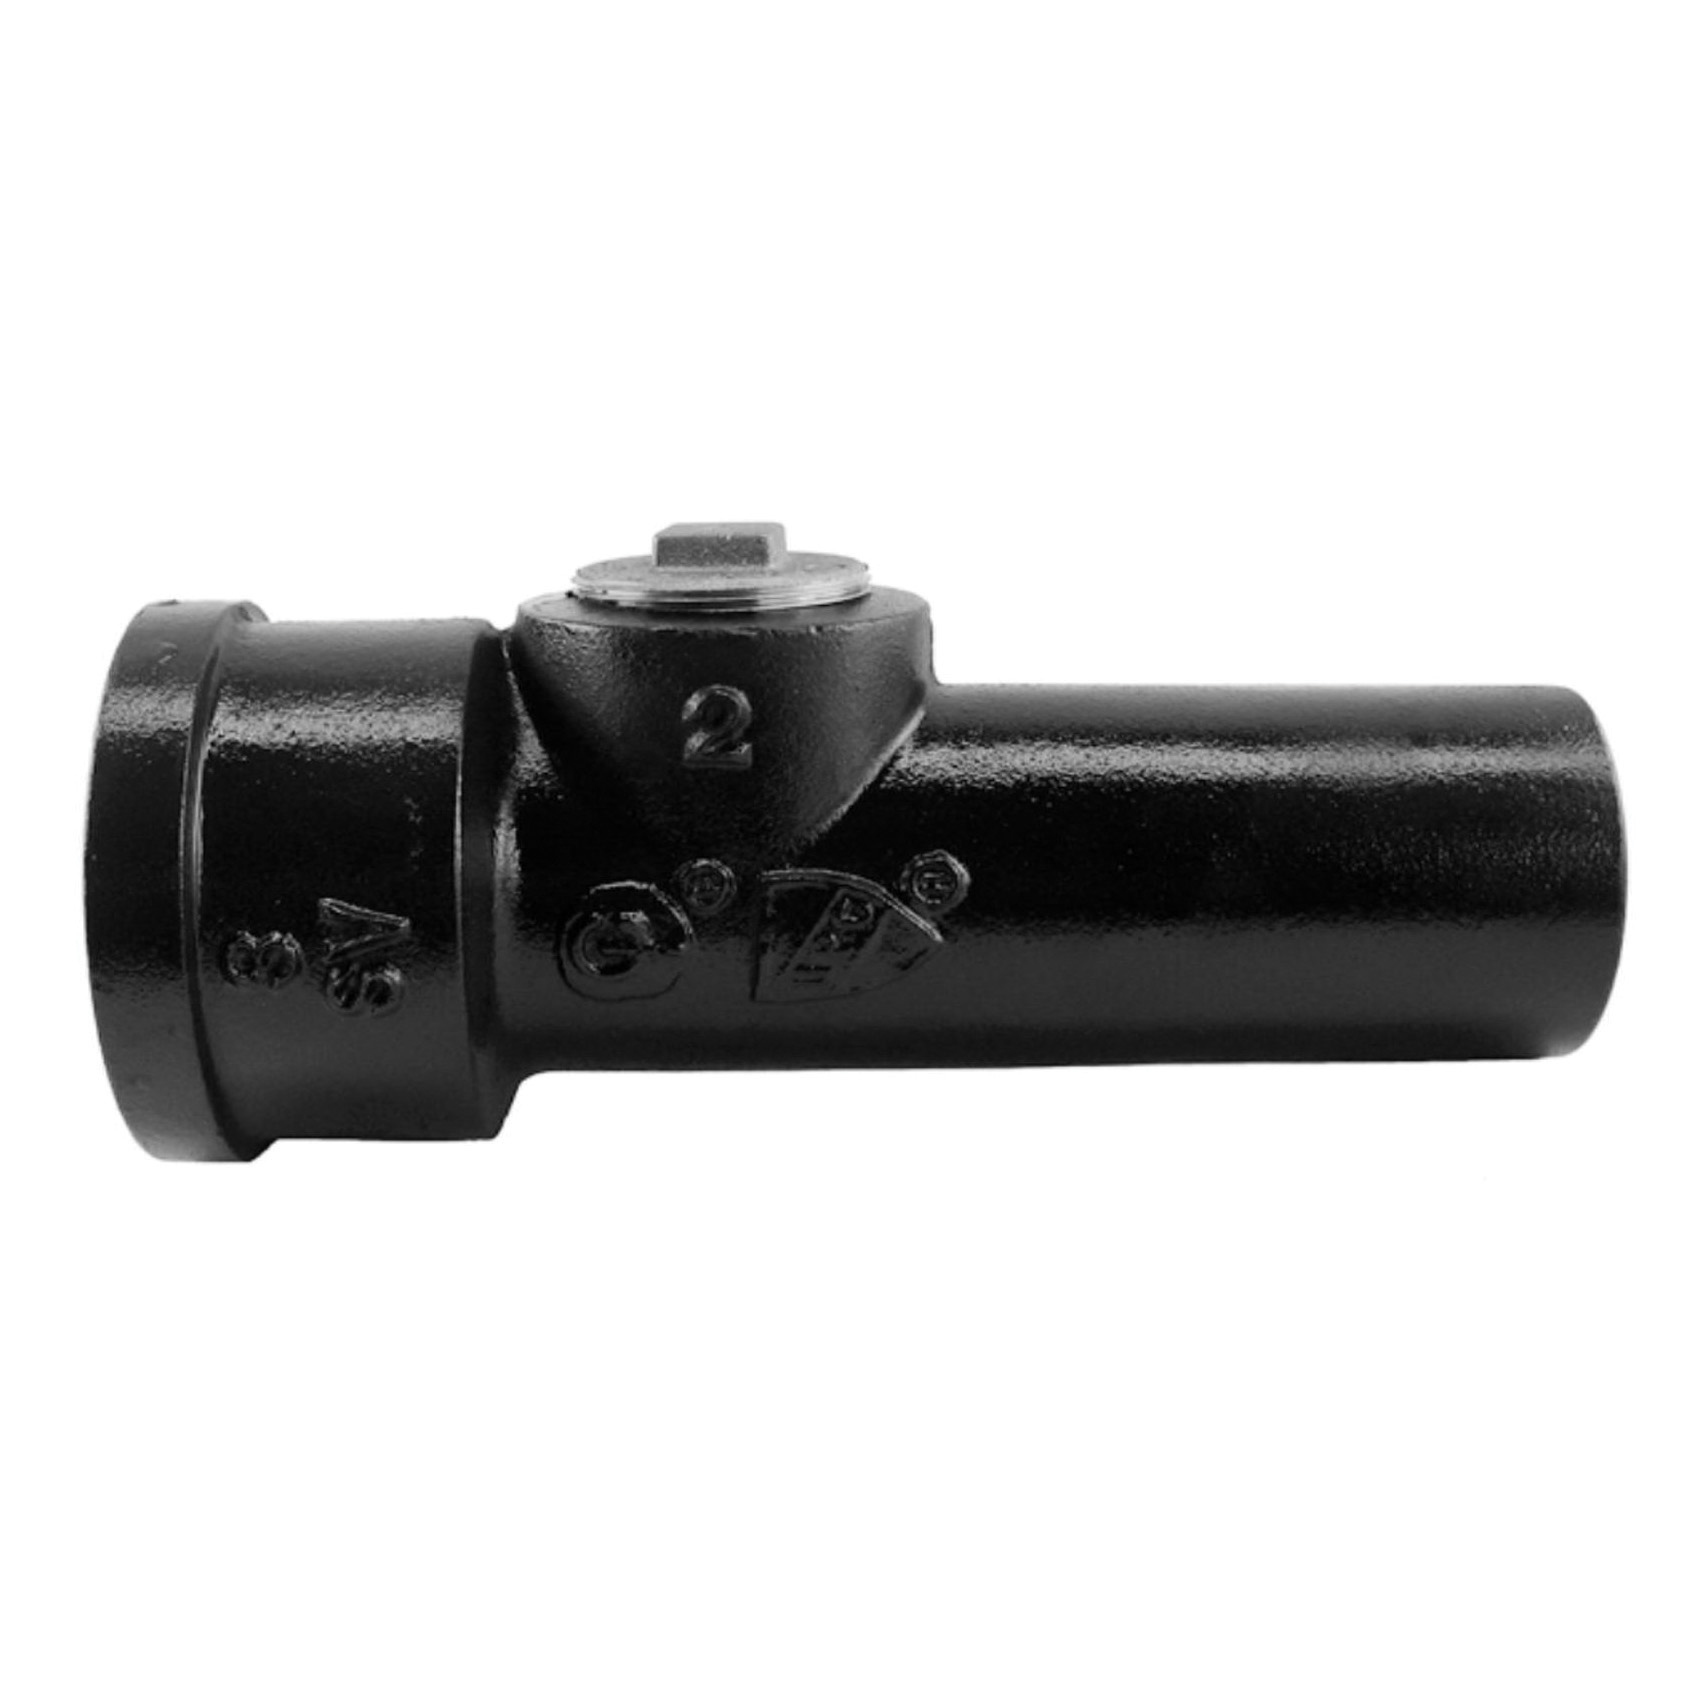 00080 1600 Cleanout Tee With Southern Raised-Head Brass Plug Installed, Cast Iron